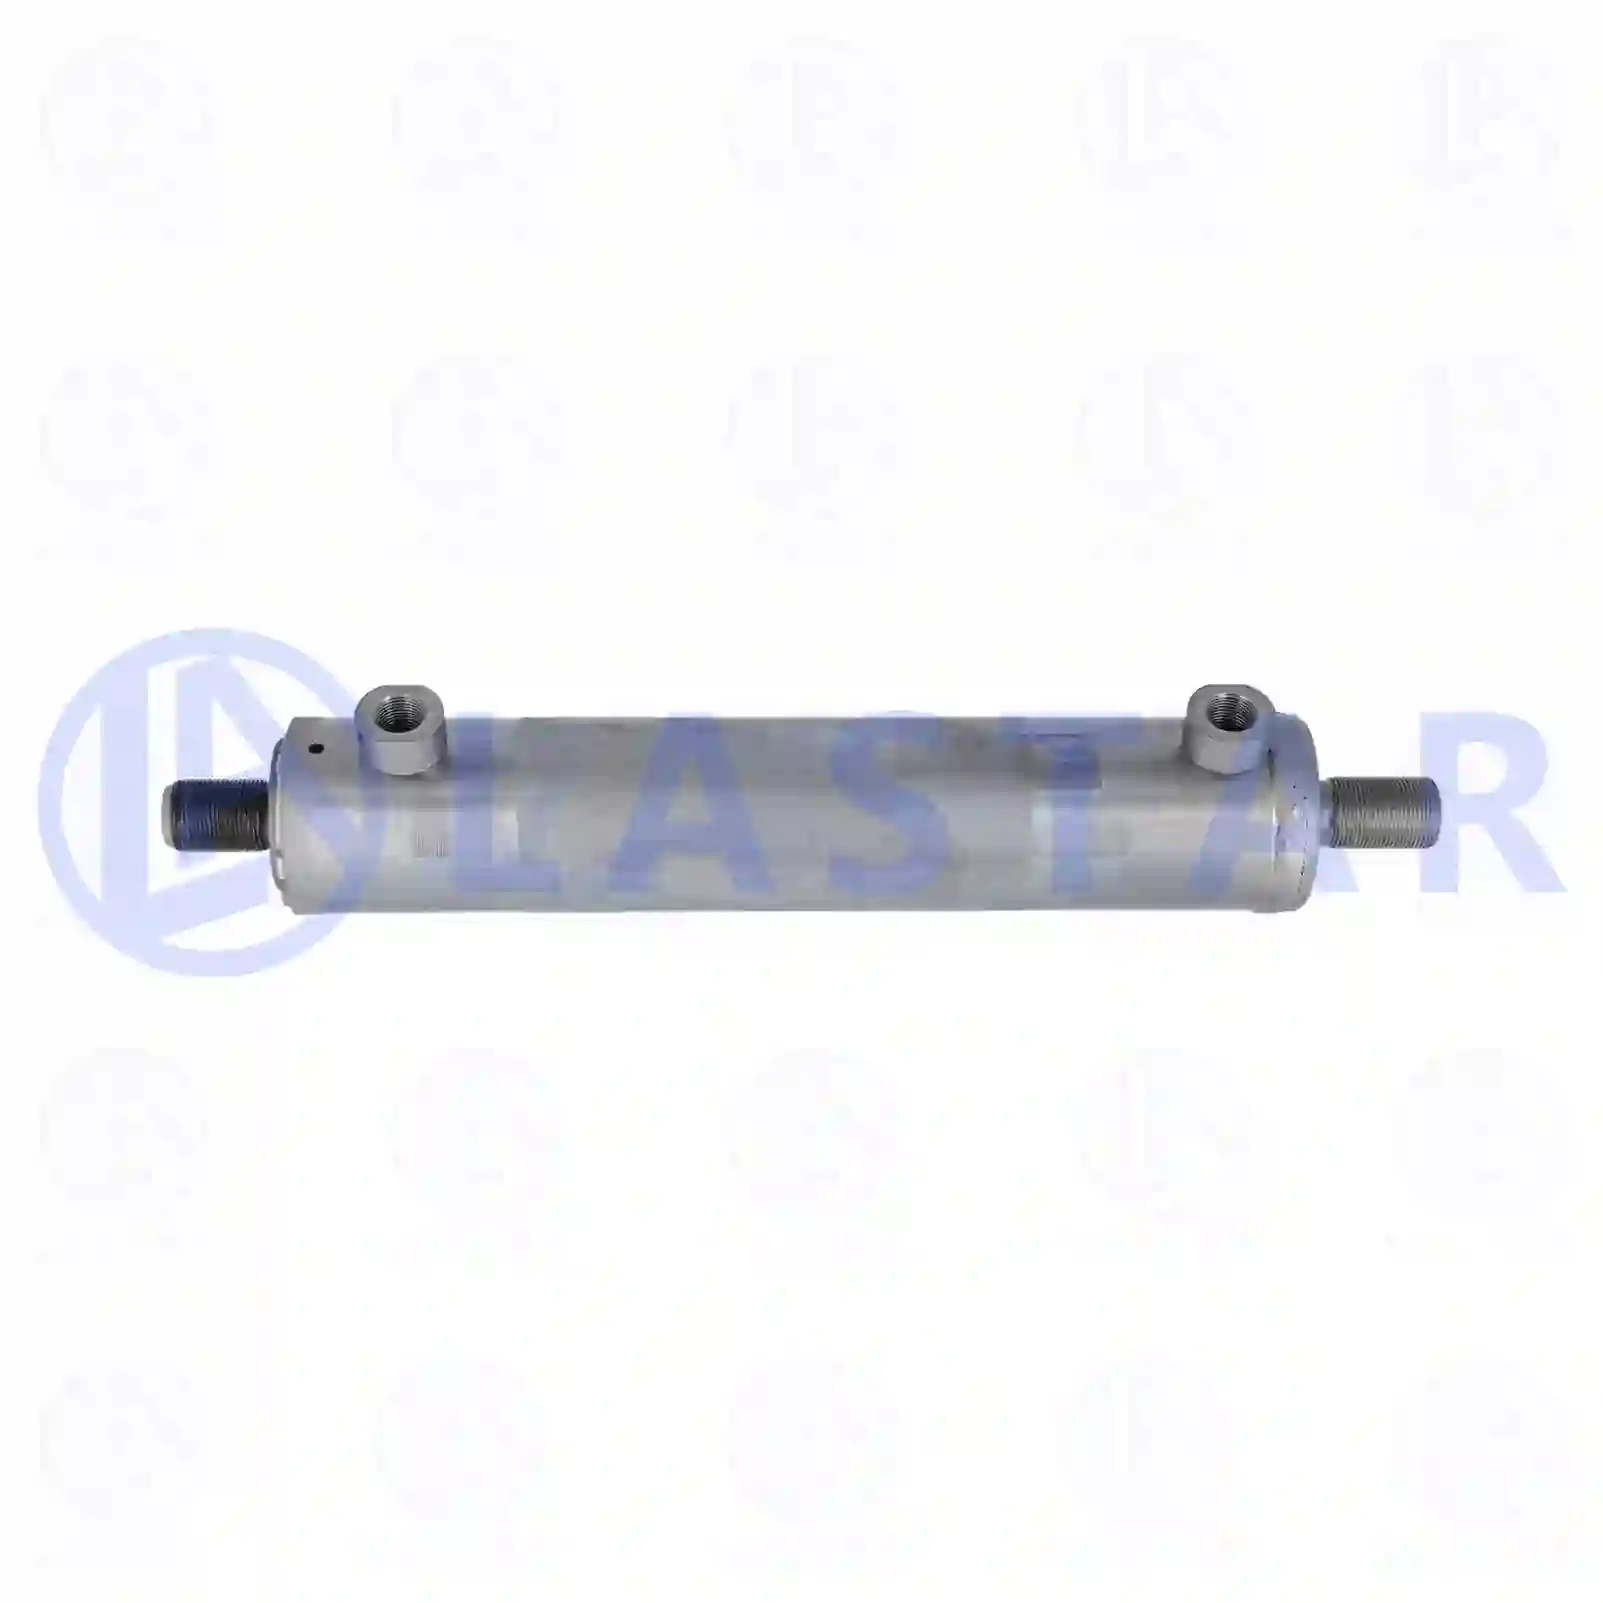 Steering cylinder, 77705925, 20374832 ||  77705925 Lastar Spare Part | Truck Spare Parts, Auotomotive Spare Parts Steering cylinder, 77705925, 20374832 ||  77705925 Lastar Spare Part | Truck Spare Parts, Auotomotive Spare Parts